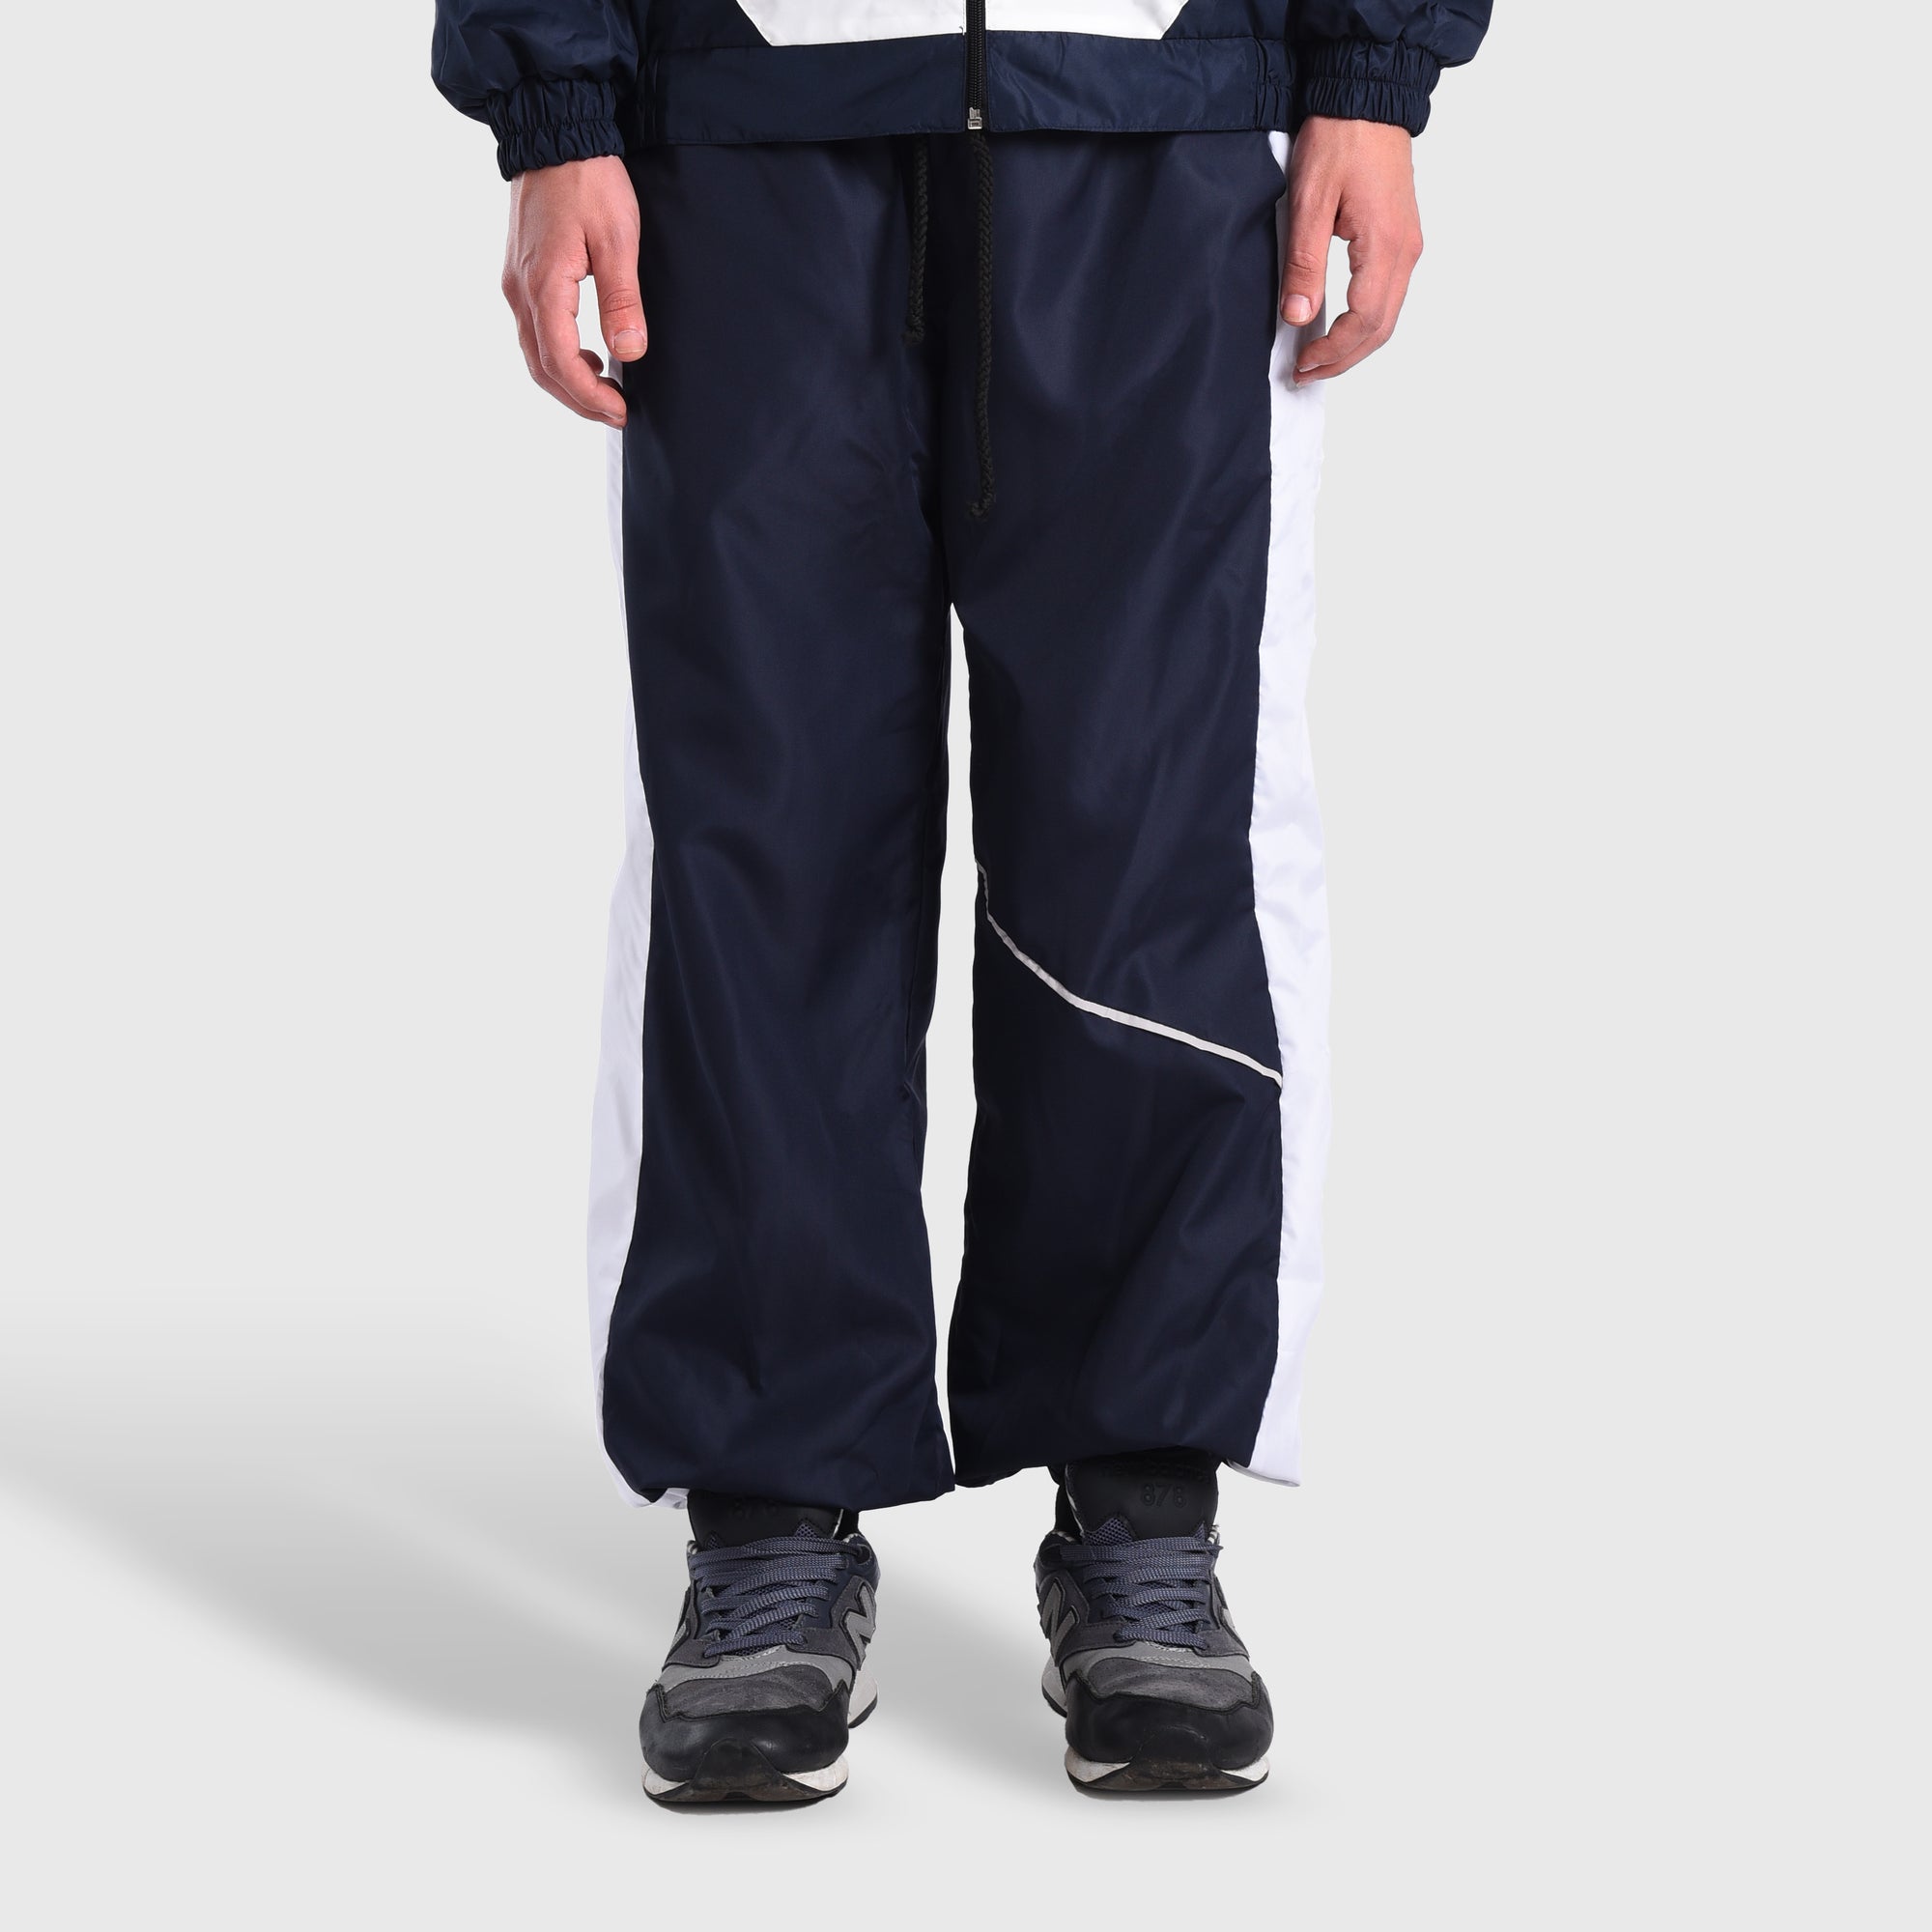 Roughneck C043 Navy Unlabeled Training Pants